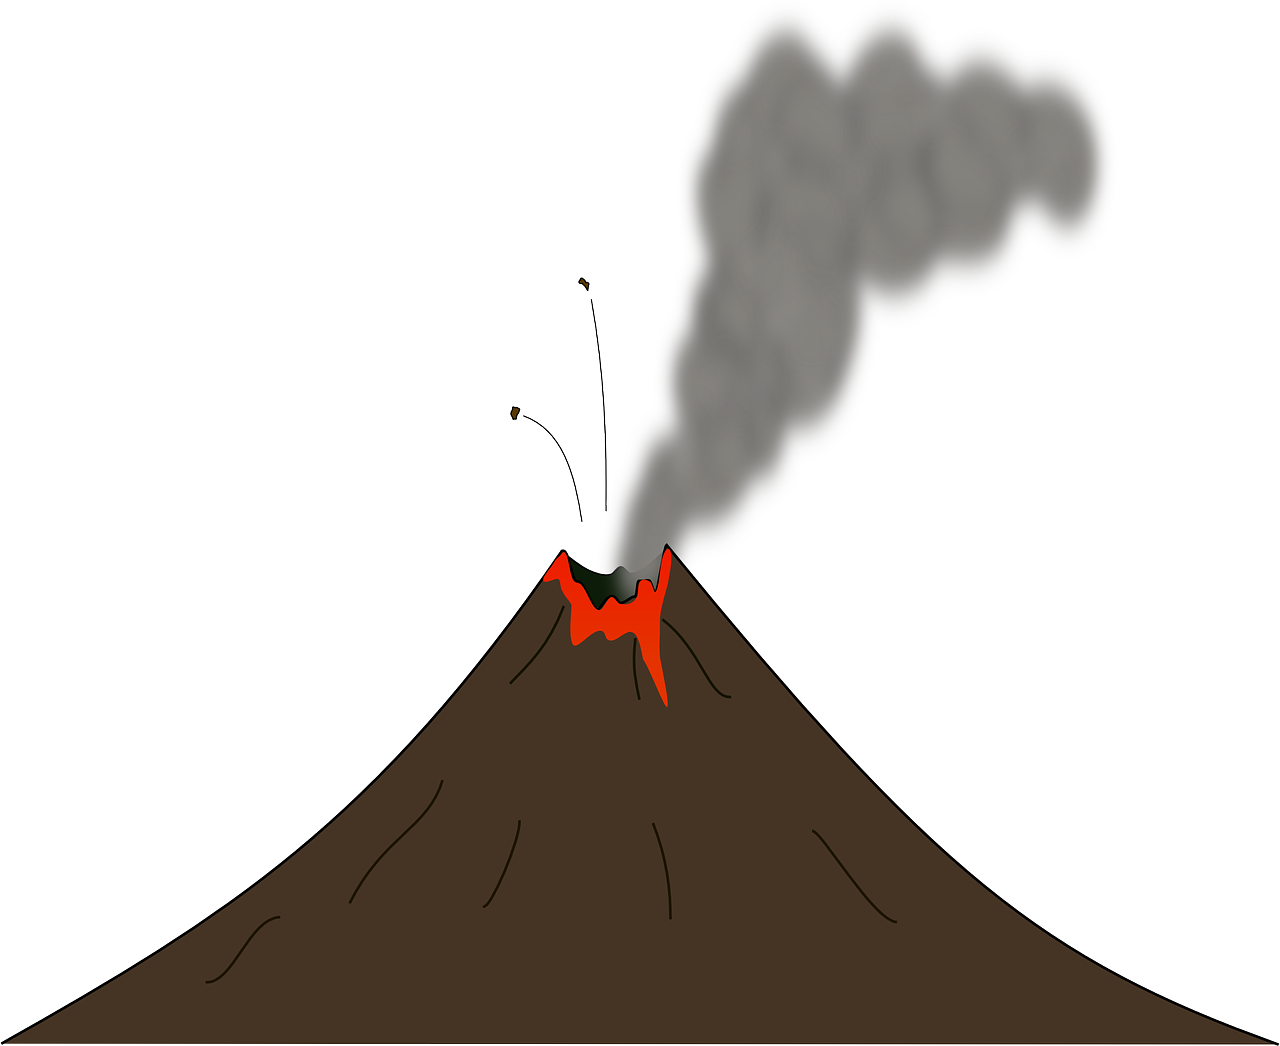 a volcano with smoke coming out of it, an illustration of, pixabay, mingei, cone, exciting illustration, !!natural beauty!!, pot